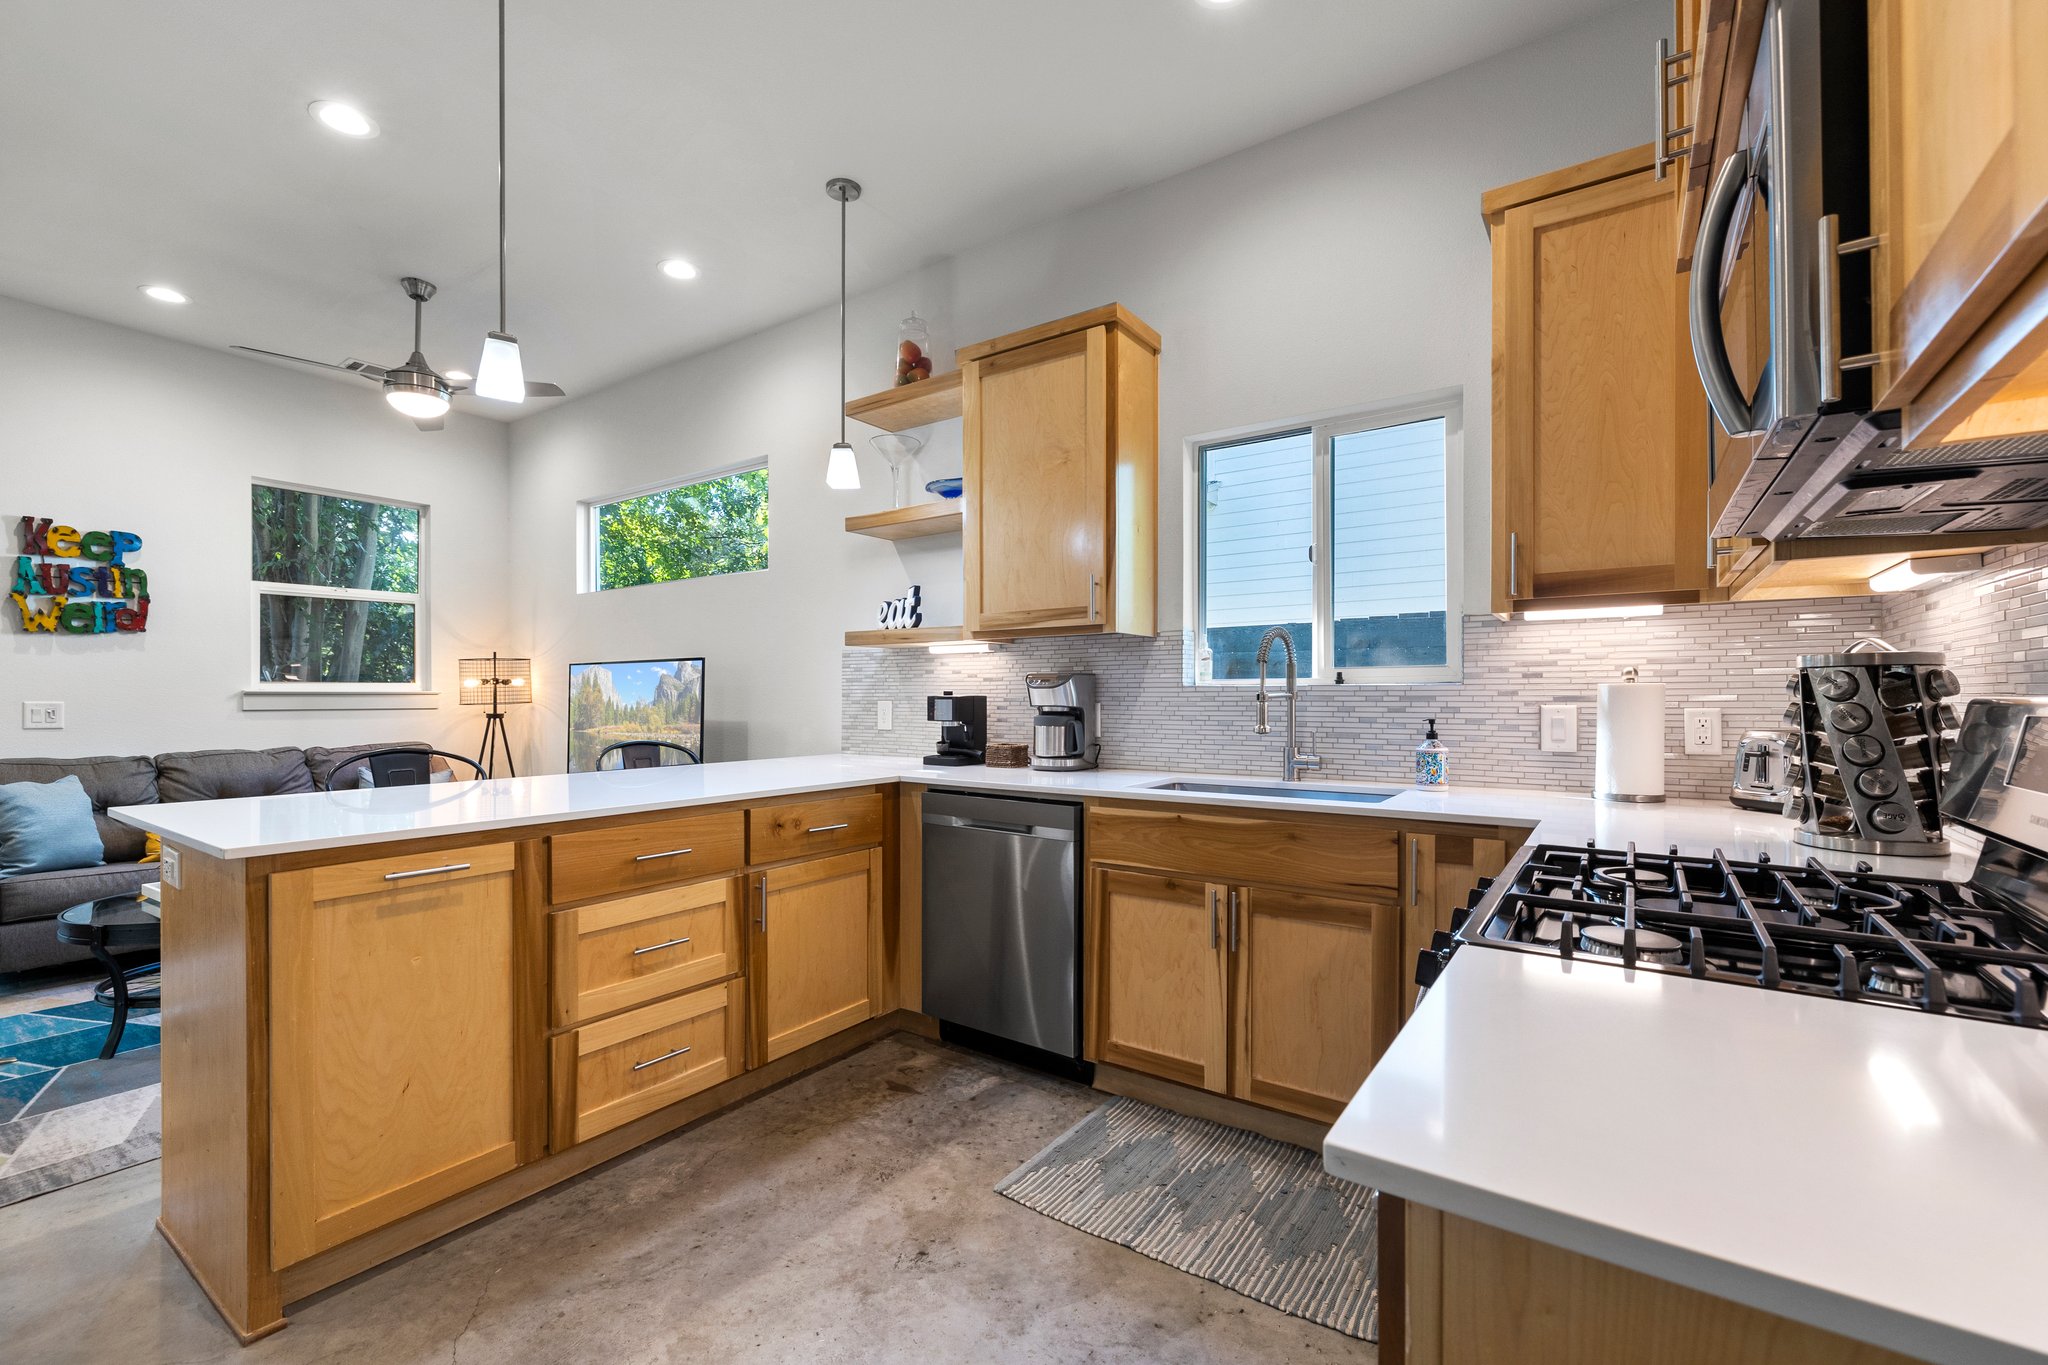 Gorgeous kitchen with maple cabinets, breakfast bar, and natural light. The "Keep Austin Weird" sign does not convey (is not included in the sale).